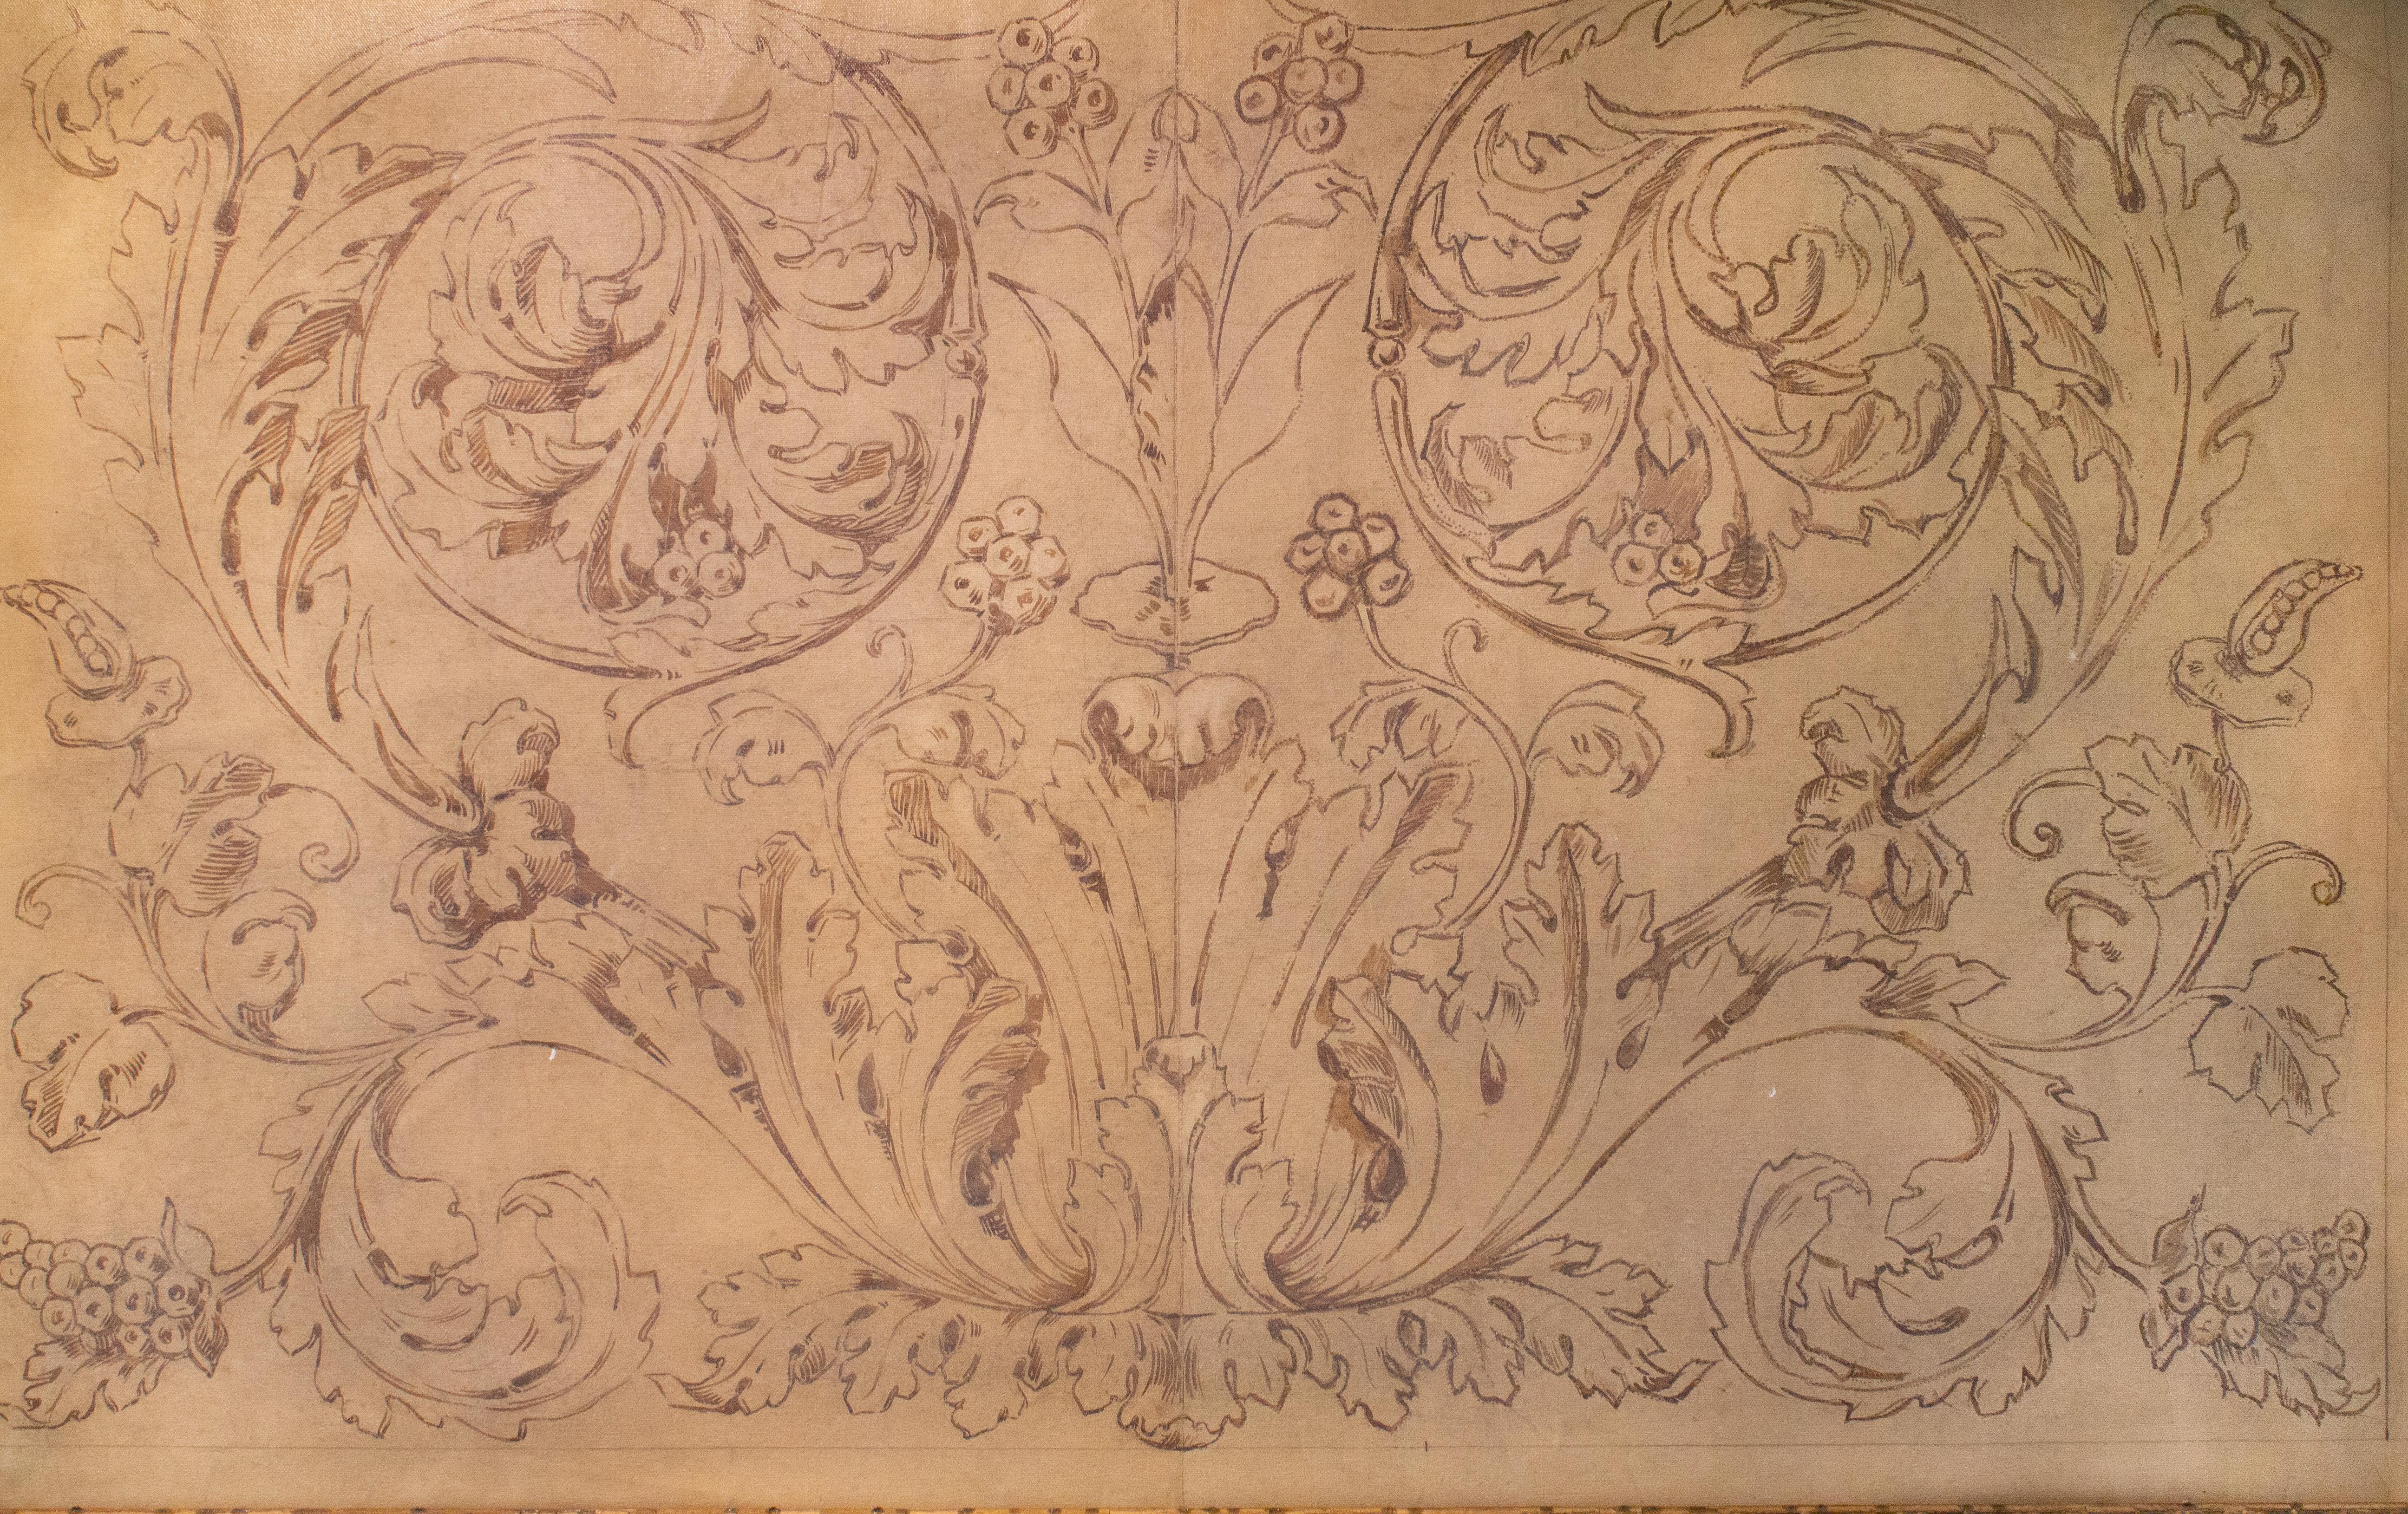 18th century Italian spolvero fresco pattern printed onto canvas and framed with an antique wood frame.

Spolvero is an artistic method of transferring a design from a print to the prepared surface of a canvas, panel, or wall. Holes are punched